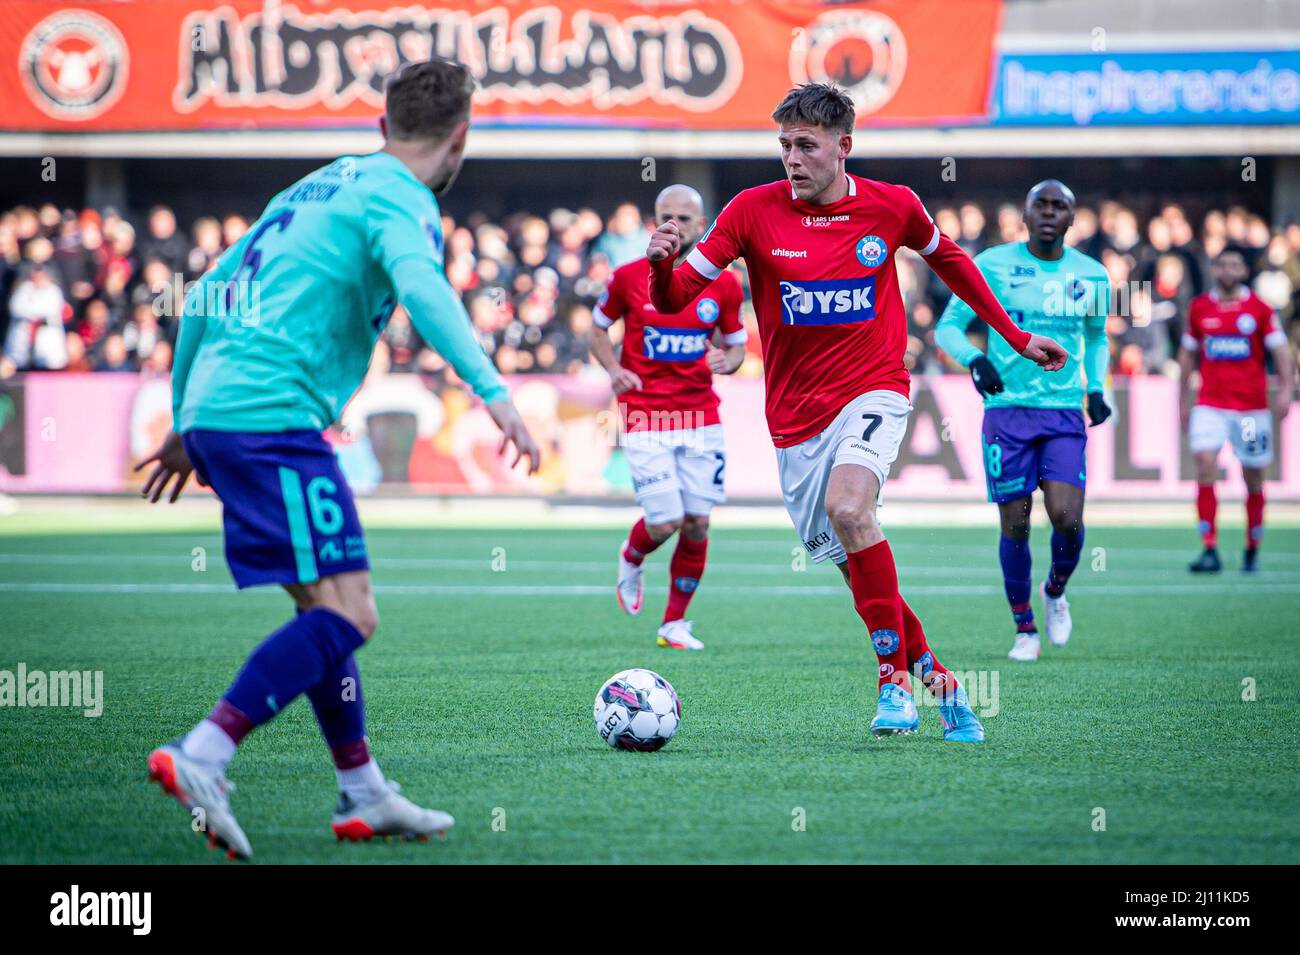 Silkeborg, Denmark. 20th, March 2022. Nicolai Vallys (7) of Silkeborg IF seen during the 3F Superliga match between Silkeborg IF and FC Midtjylland at Jysk Park in Silkeborg. (Photo credit: Gonzales Photo - Morten Kjaer). Stock Photo